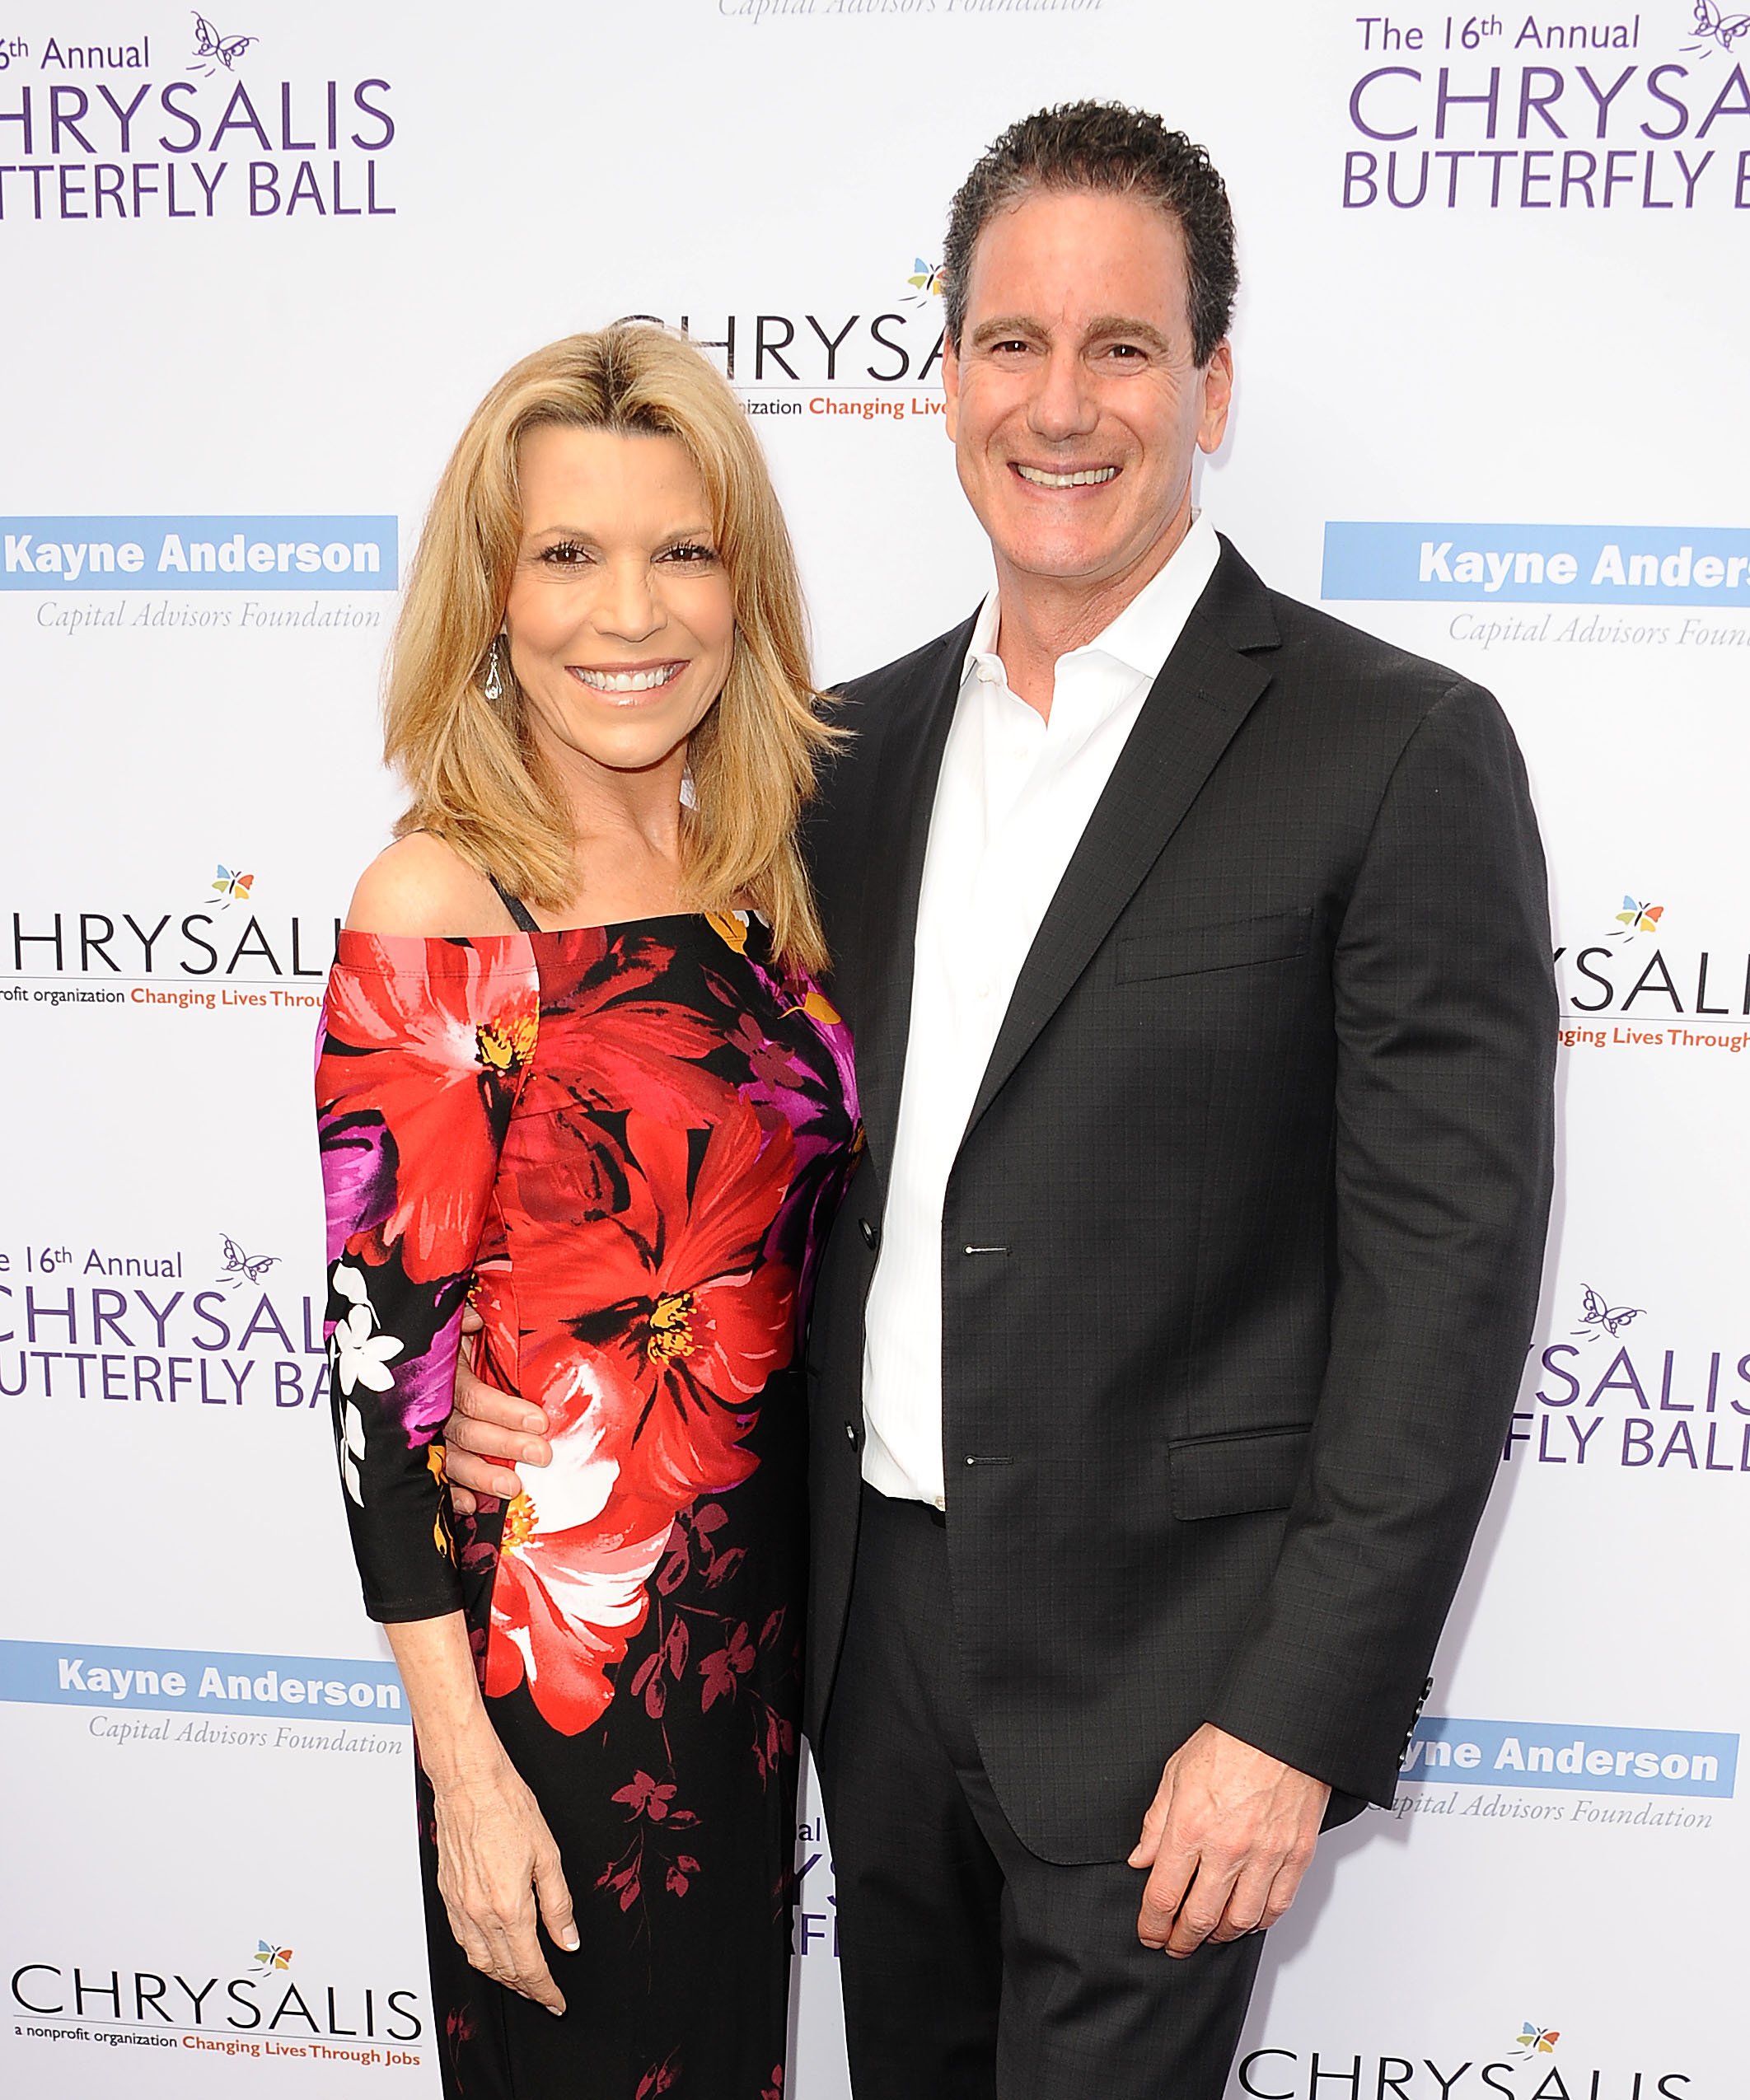 Vanna White and John Donaldson at the 16th annual Chrysalis Butterfly Ball on June 3, 2017, in Brentwood, California. | Source: Getty Images